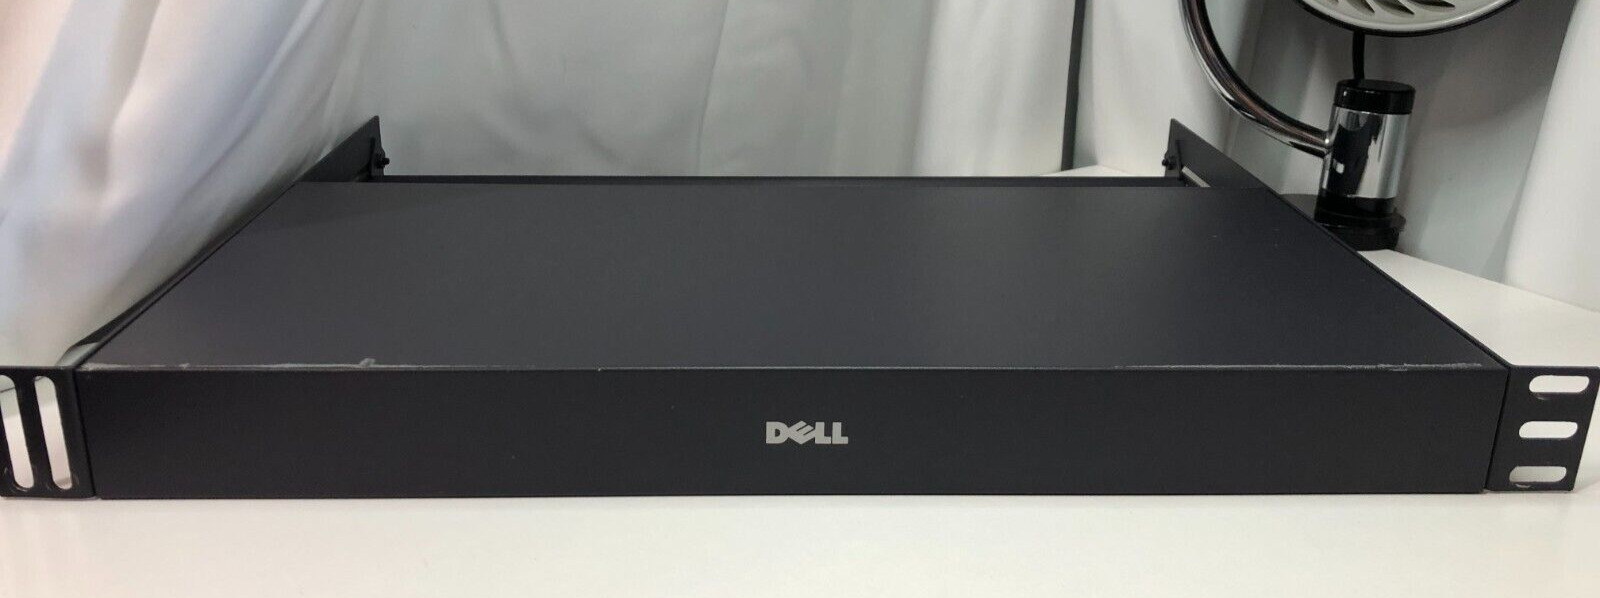 Dell KVM Switch Box 8 Port with Cables | 71PXP  | Inspected Fast Shipping USA